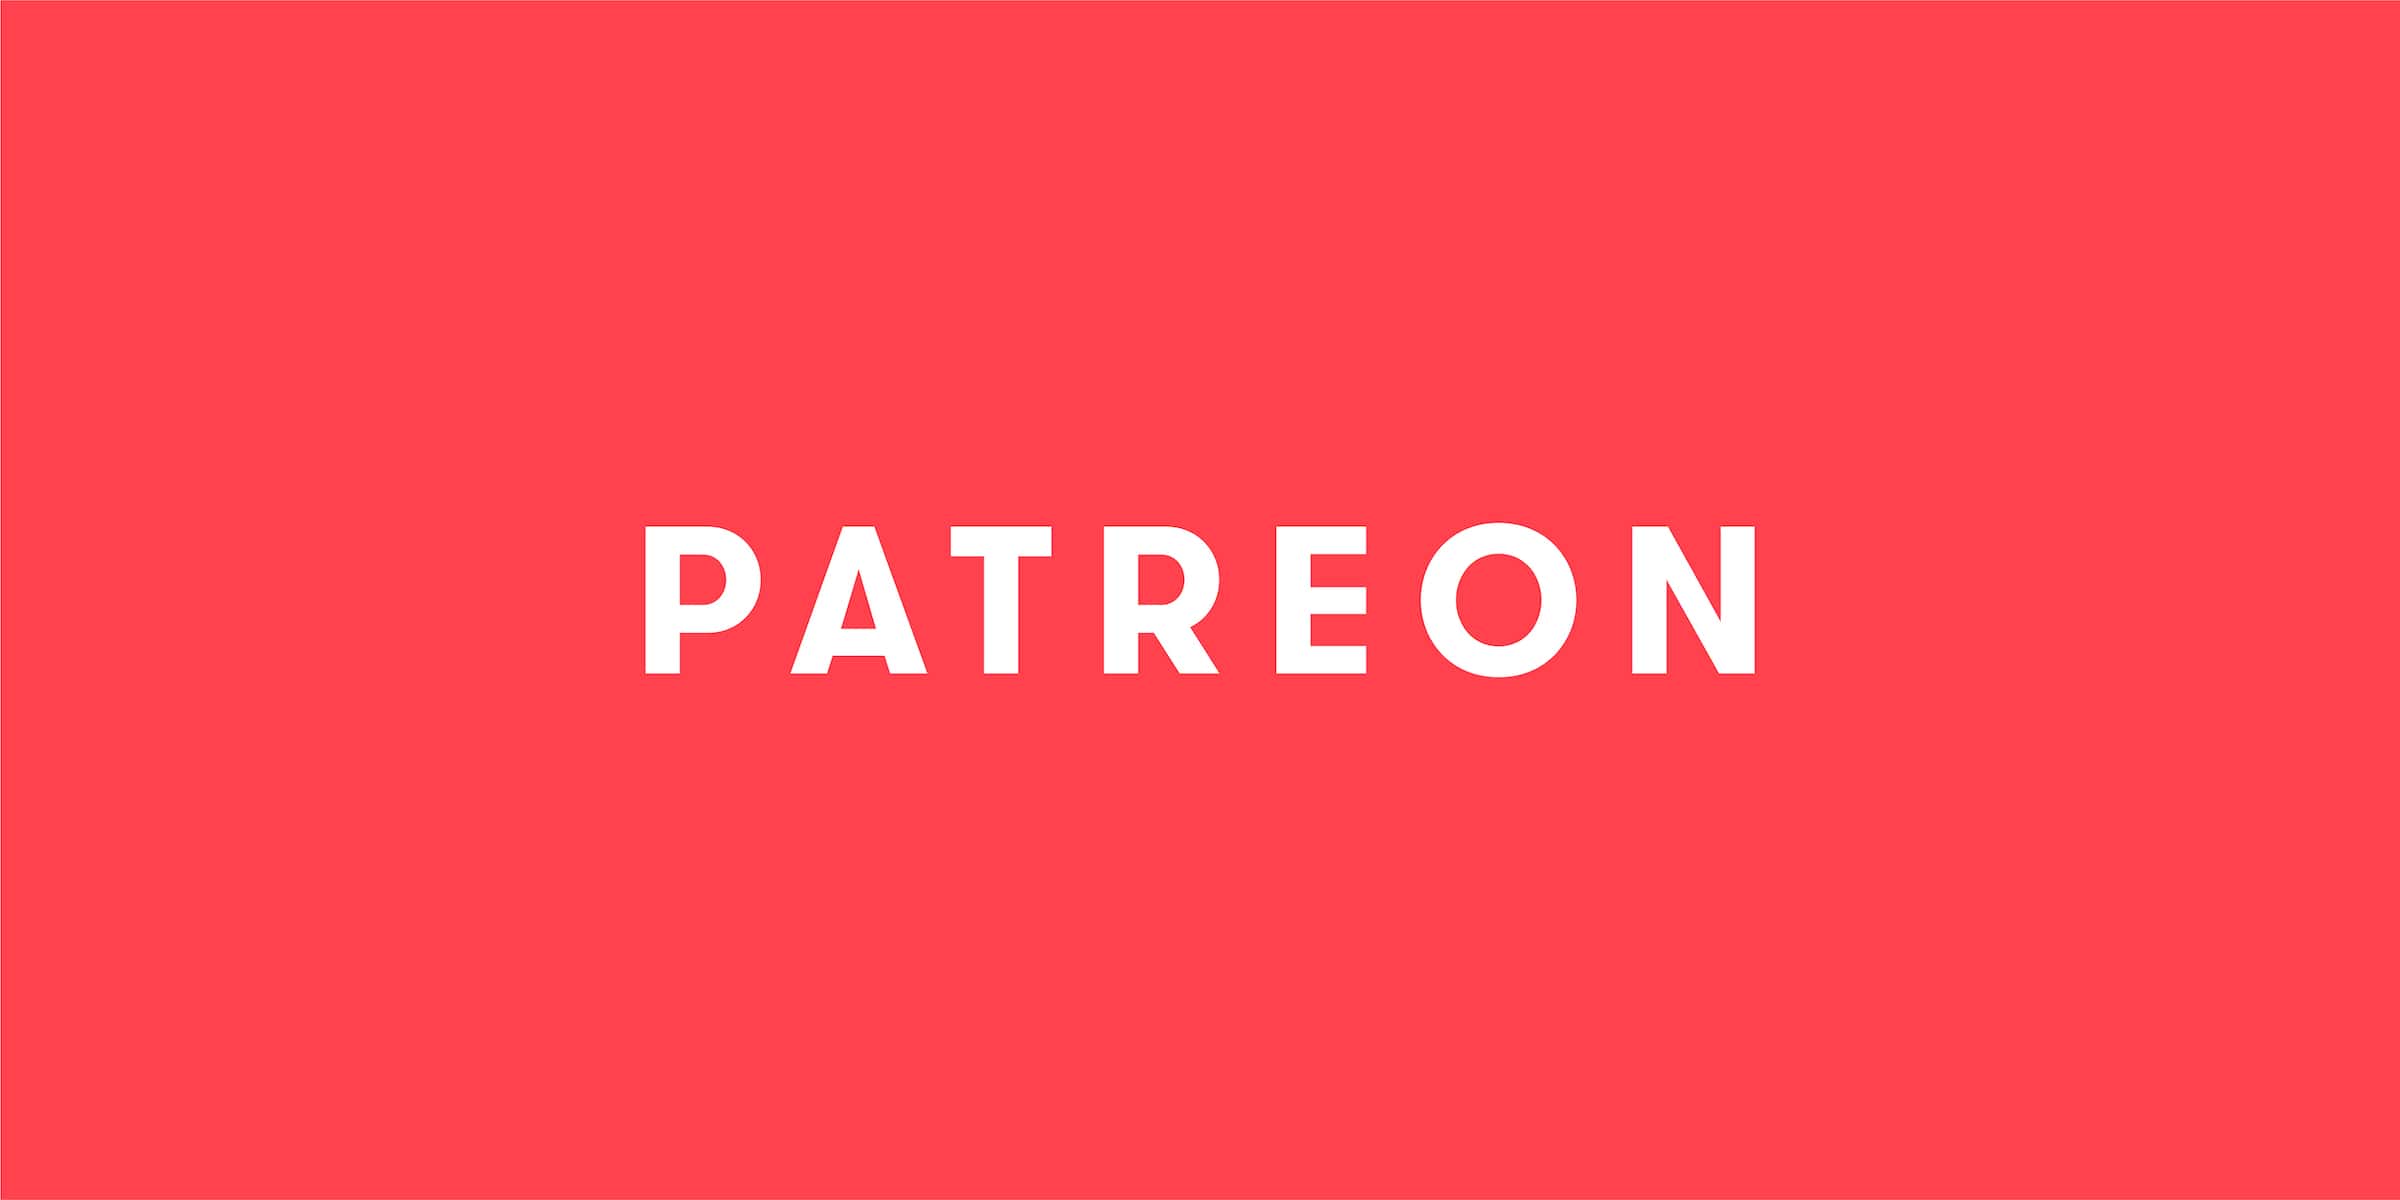 What's Up, Patreon?